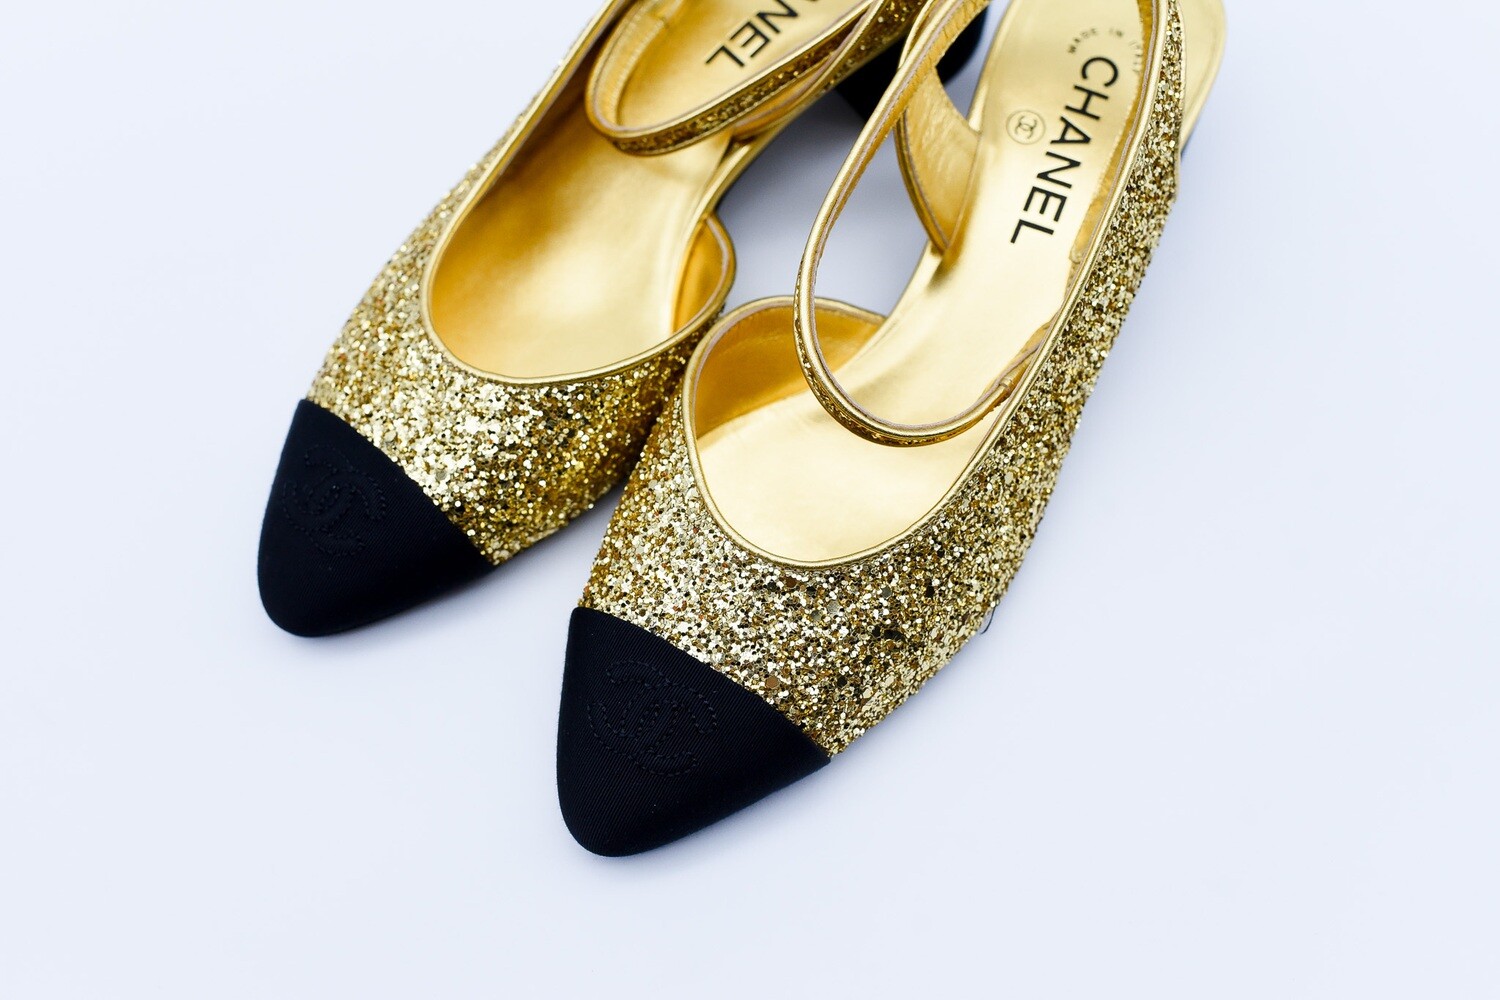 Chanel Shoes Glitter Ankle Wrap Pumps/Sandals, Gold, Size 40, New in Box  GA006 - Julia Rose Boston